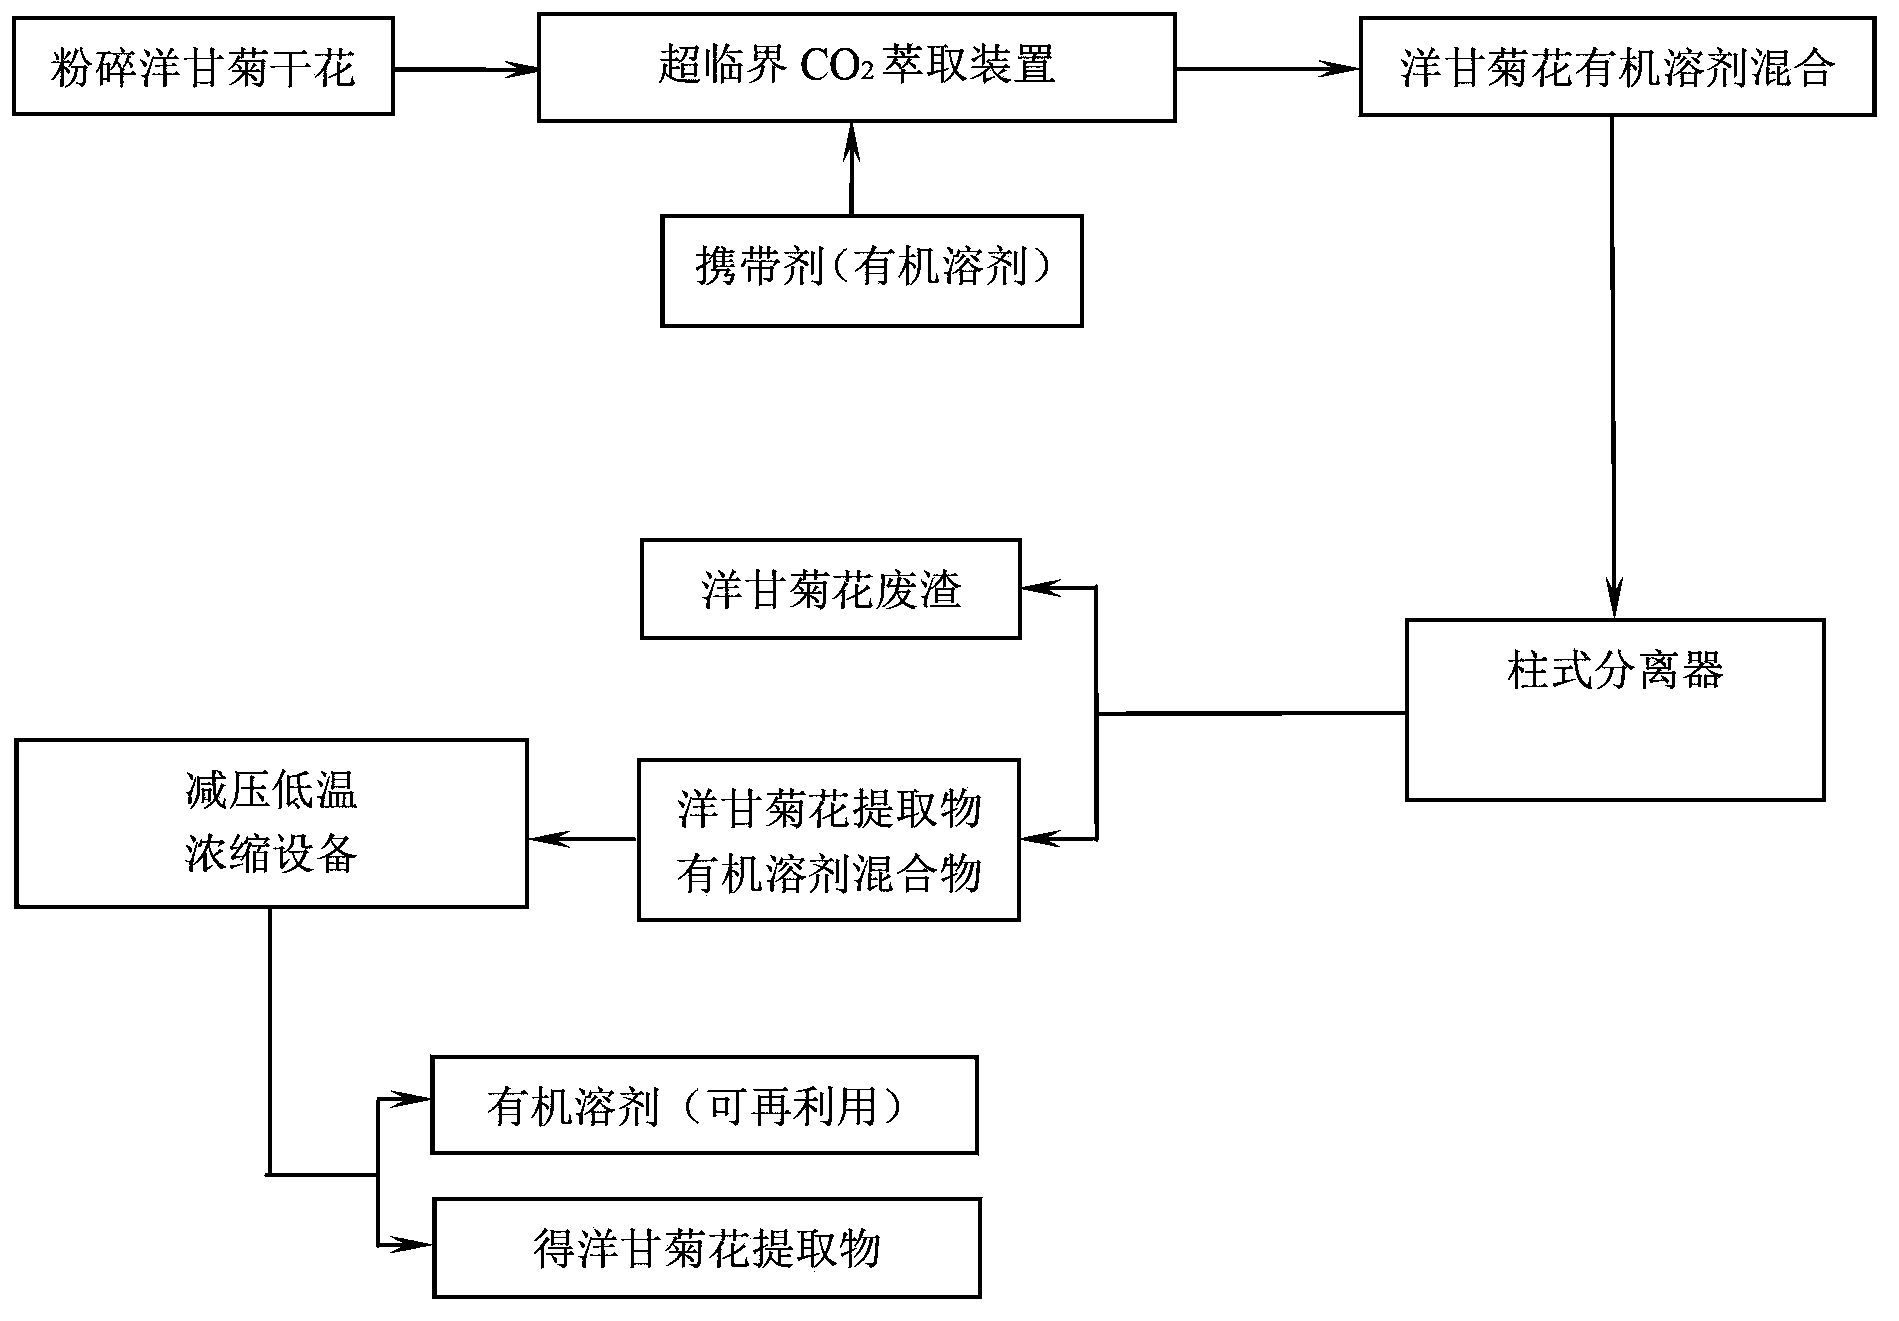 Method used for extracting chamomille extract by supercritical carbon dioxide extraction